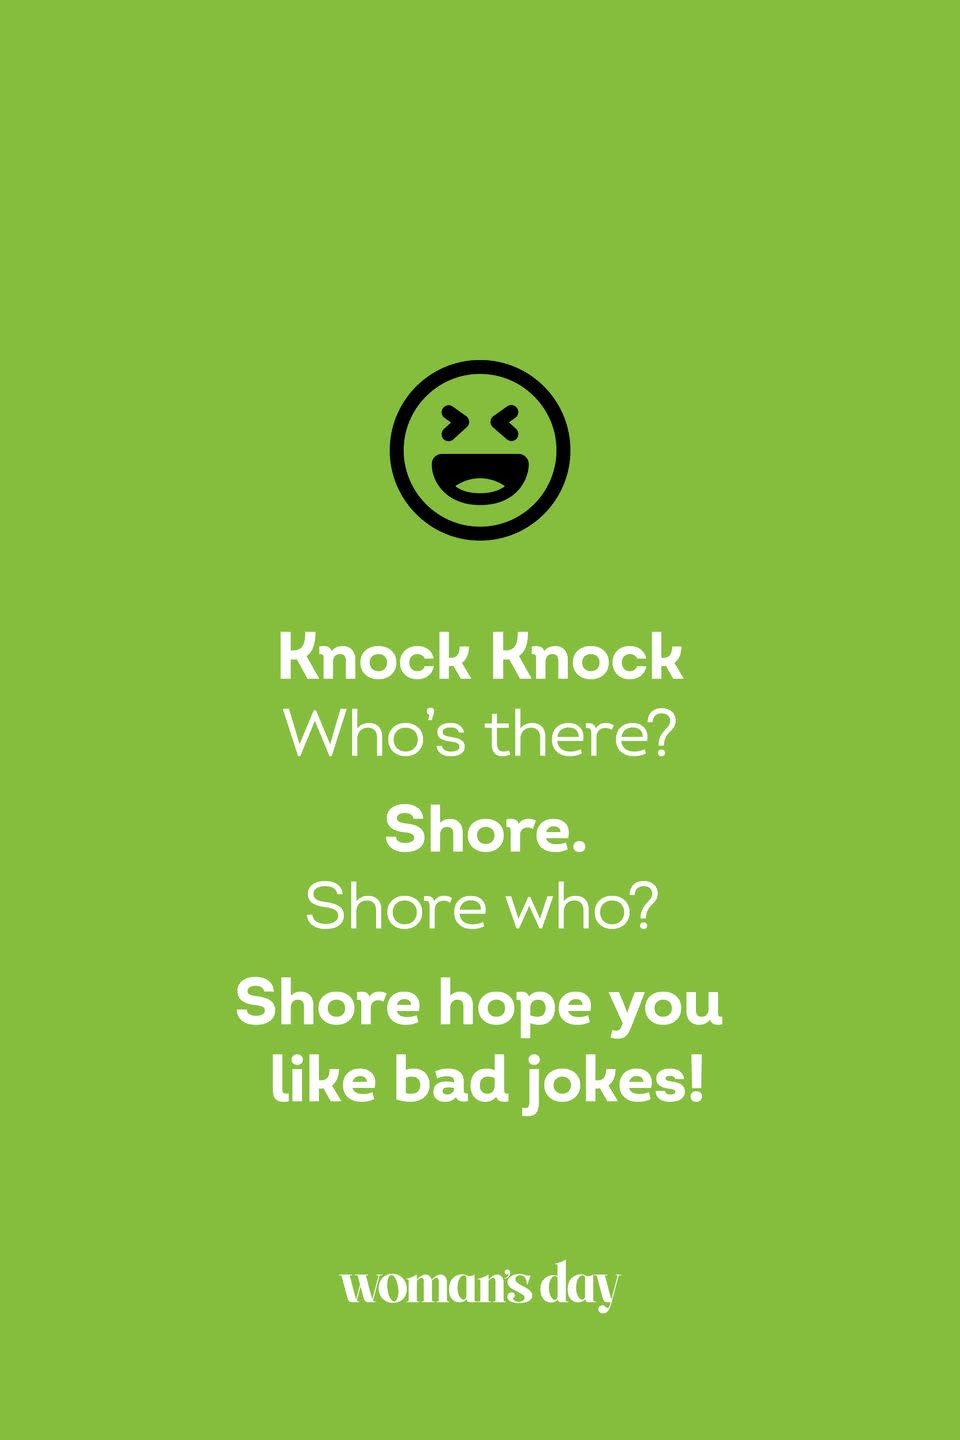 <p><strong>Knock Knock.</strong></p><p><em>Who’s there?</em></p><p><strong>Shore.</strong></p><p><em>Shore who?</em></p><p><strong>Shore hope you like bad jokes!</strong></p>